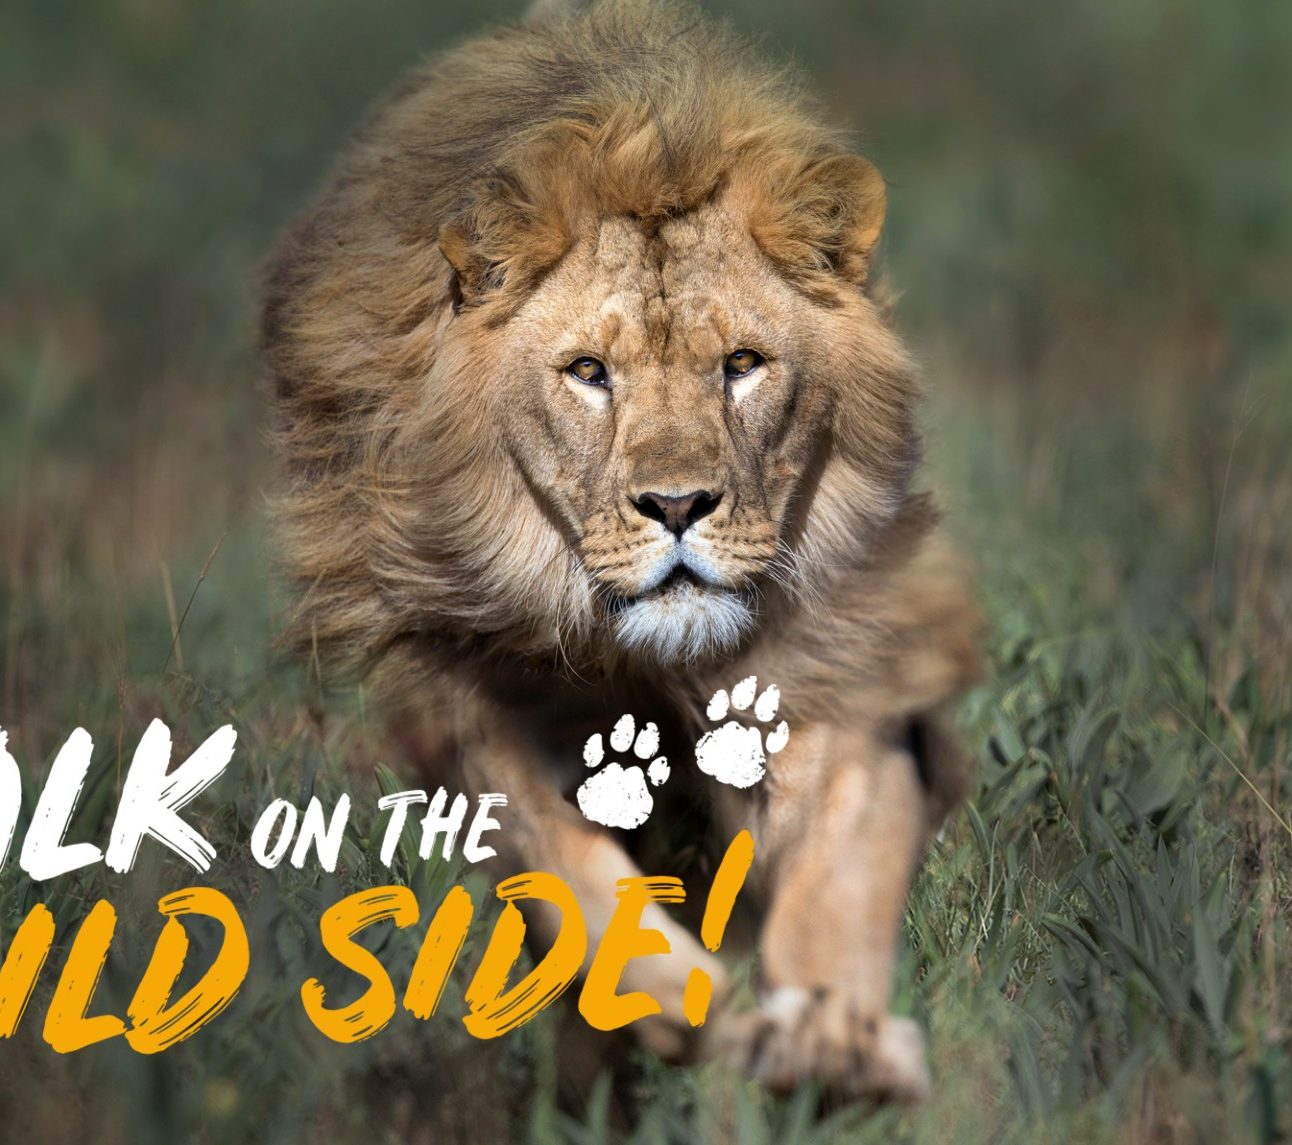 A male lion running towards the camera through long grass, his mane blowing in the wind. The words 'Walk on the Wild Side' are overlaid onto the image